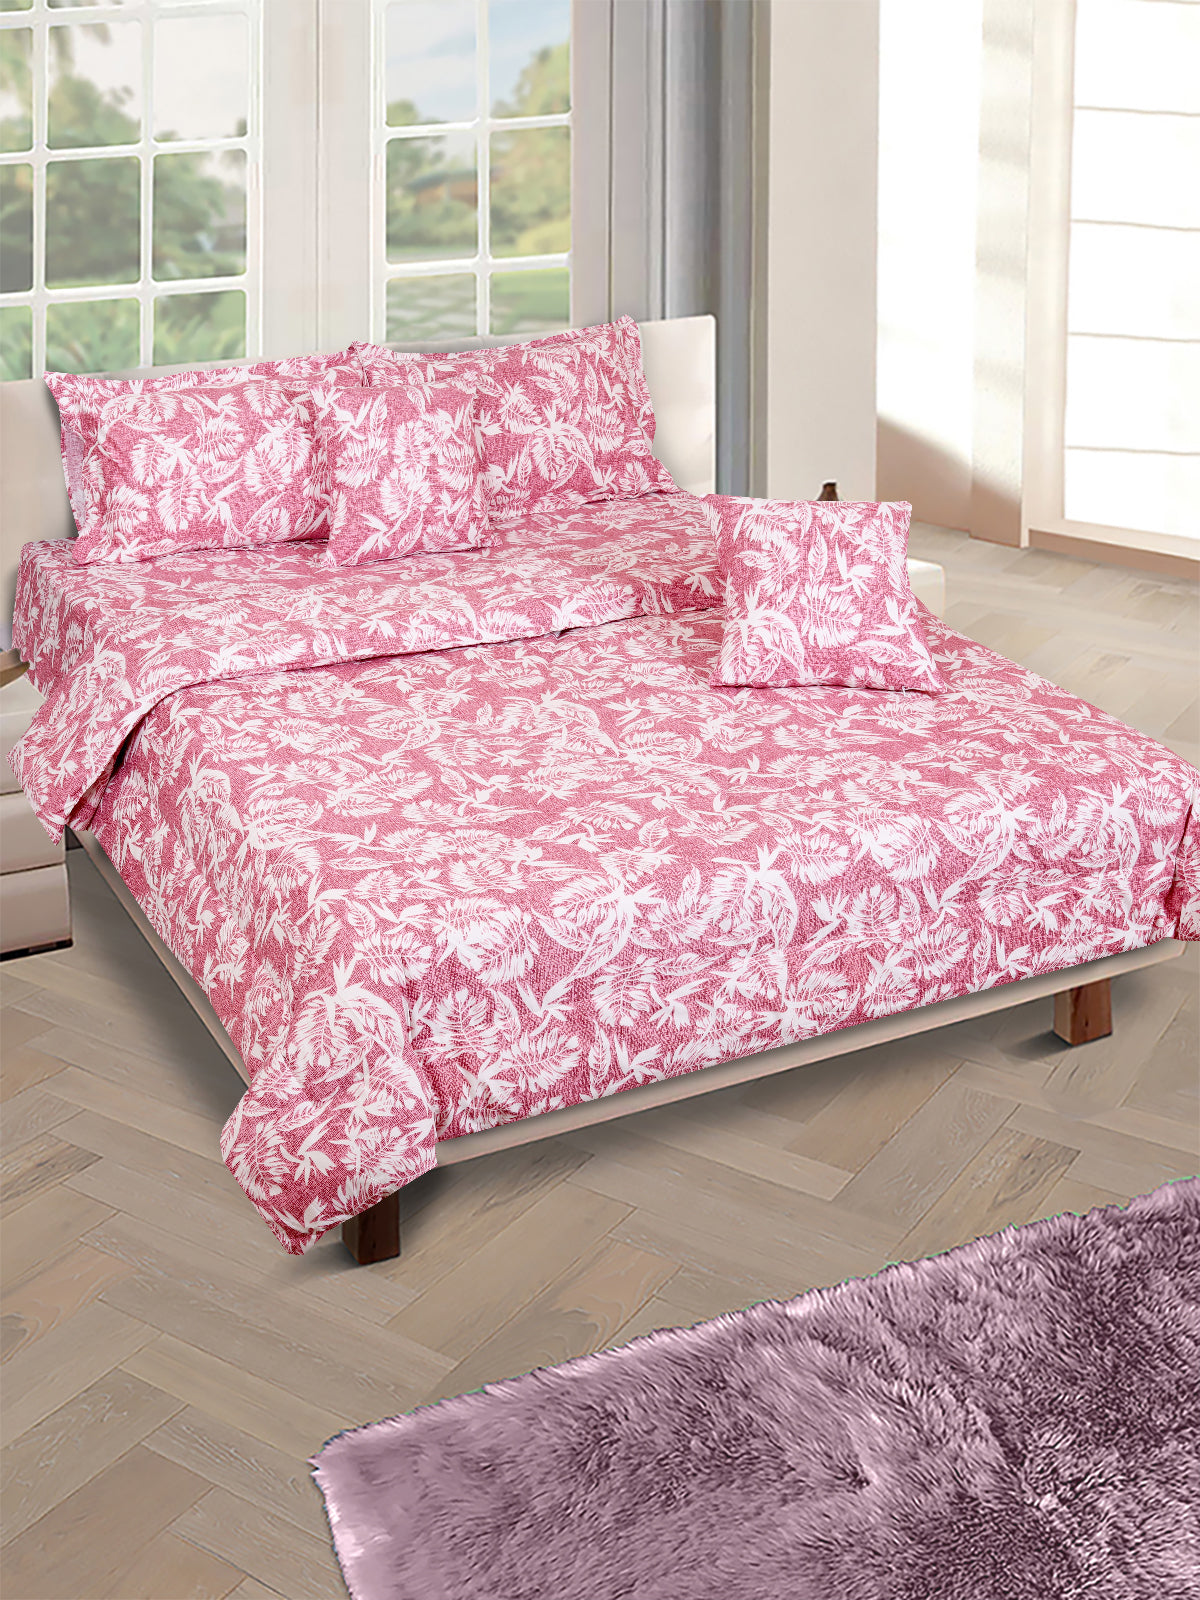 Pink & White Floral Printed Cotton Double Queen Bedding Set With Pillow Cover